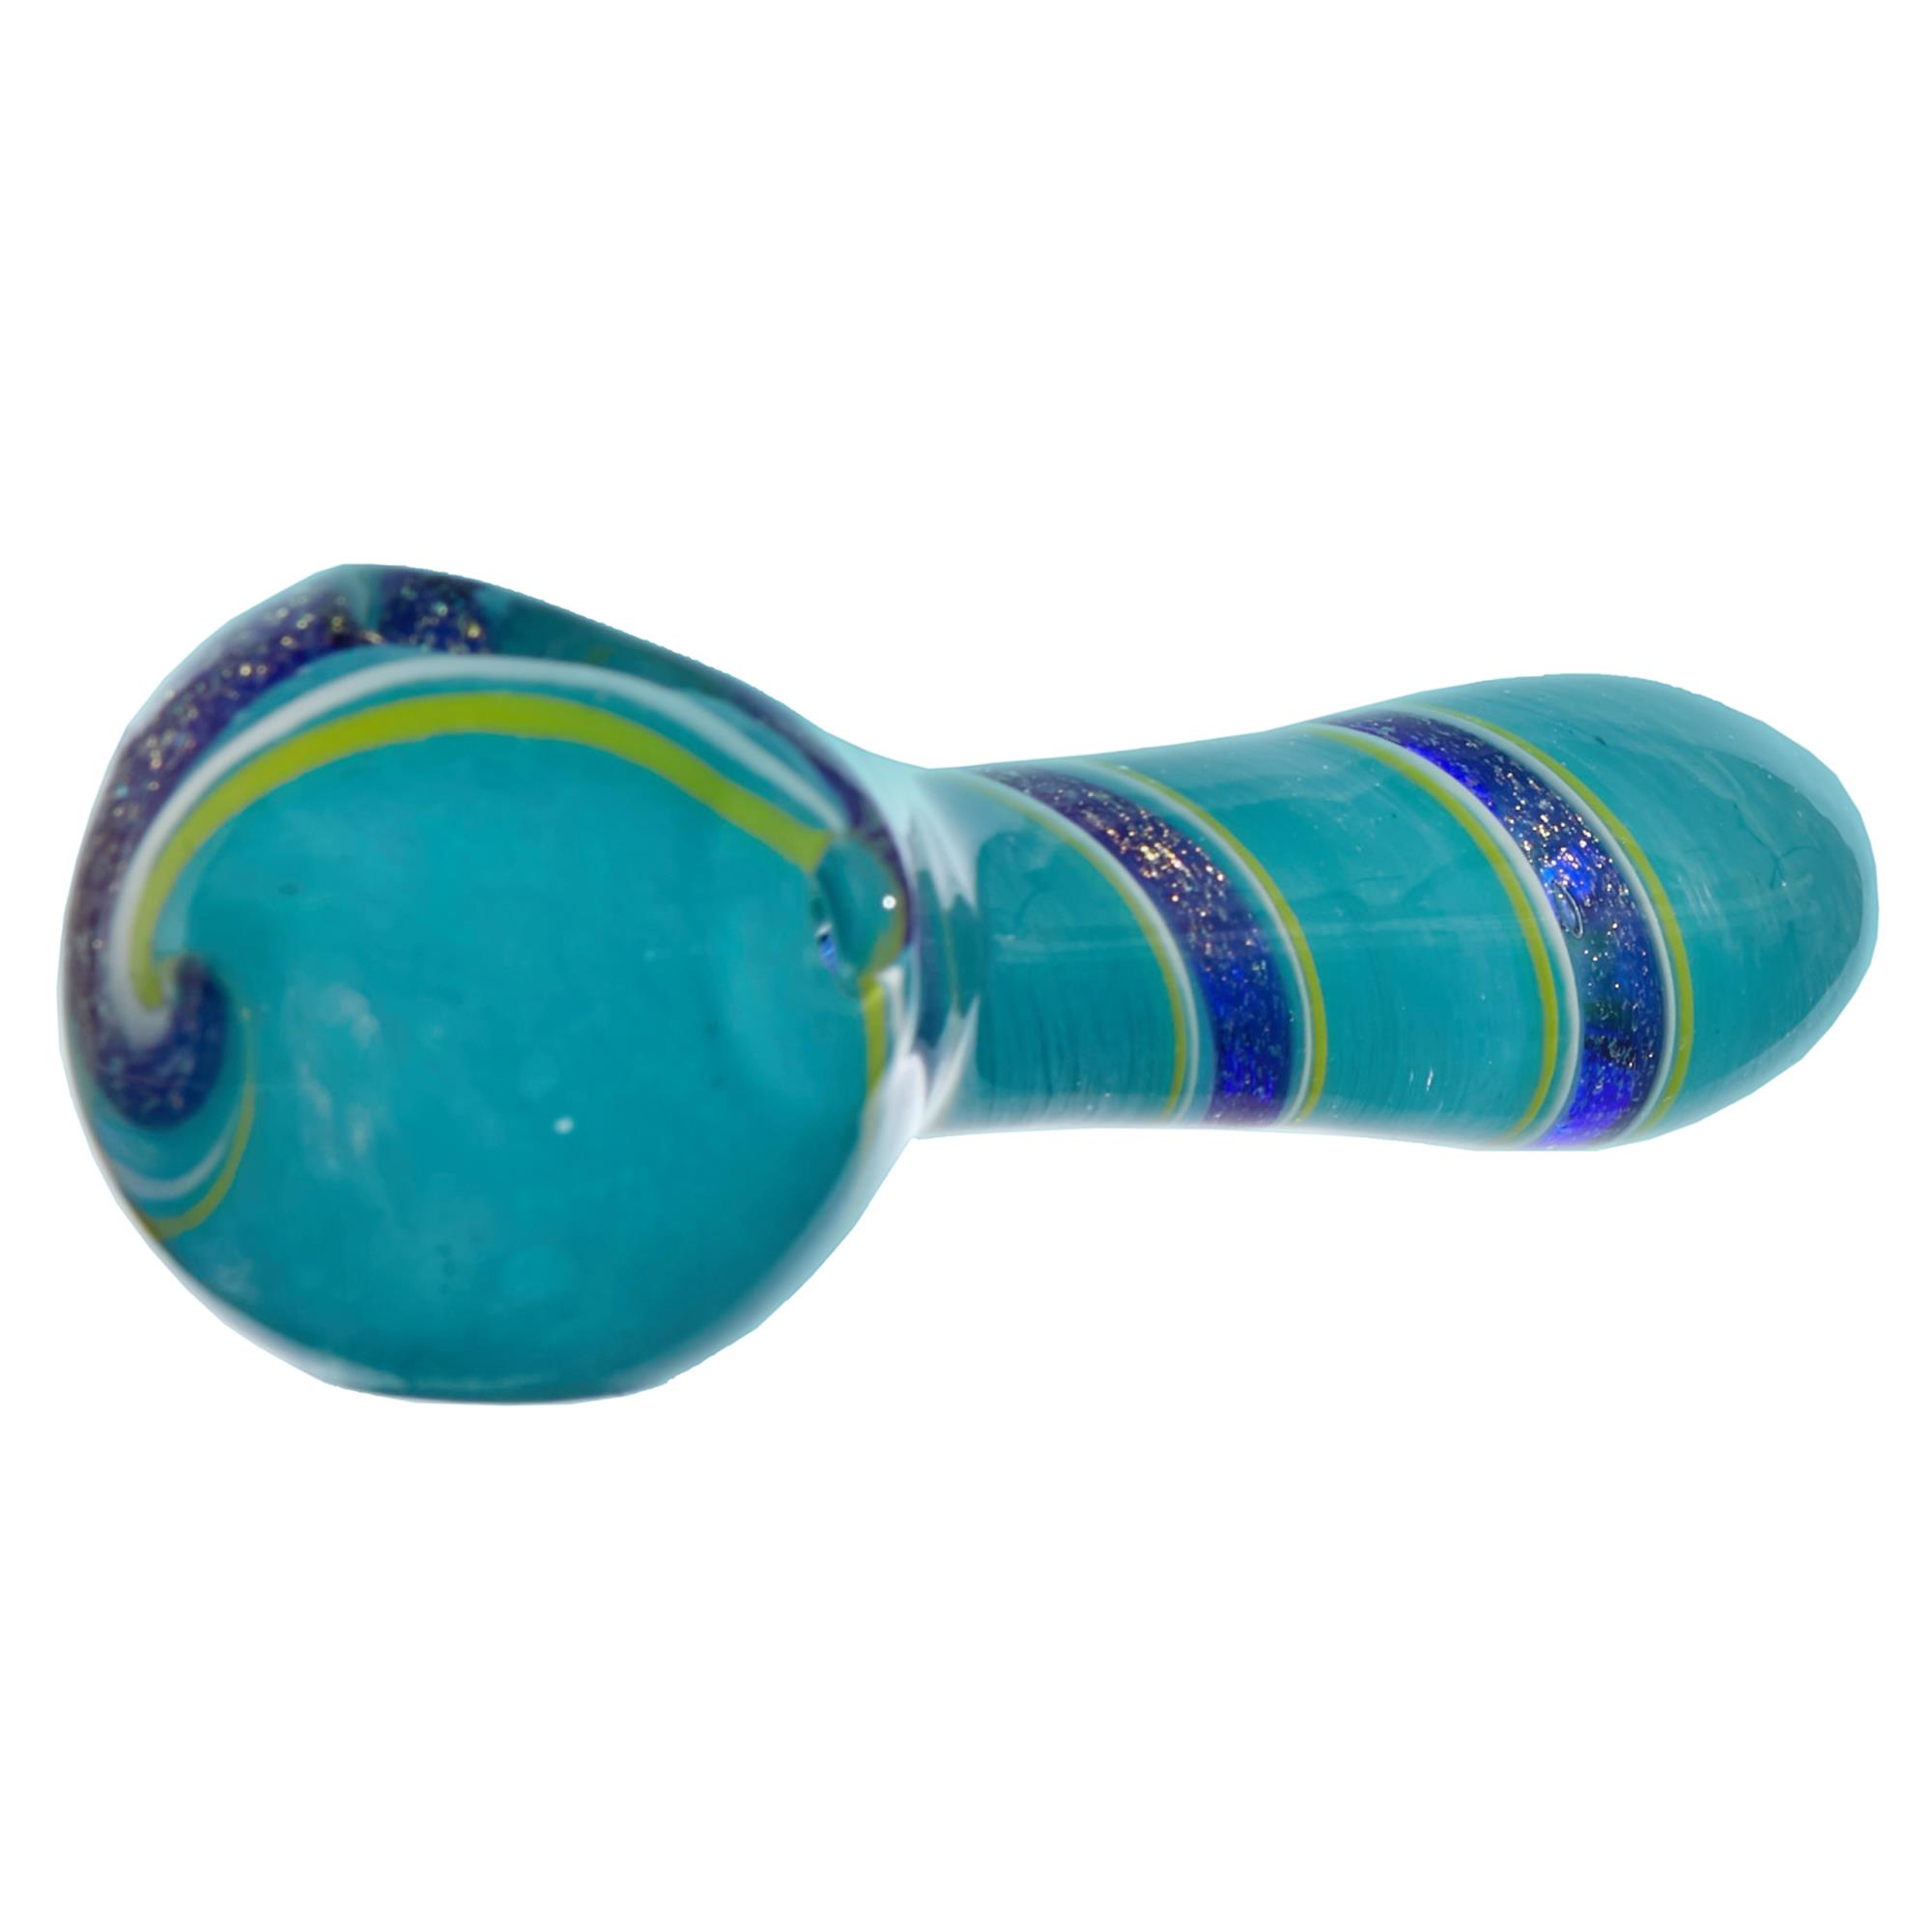 SPARKLE SPIRAL SPOON PIPE